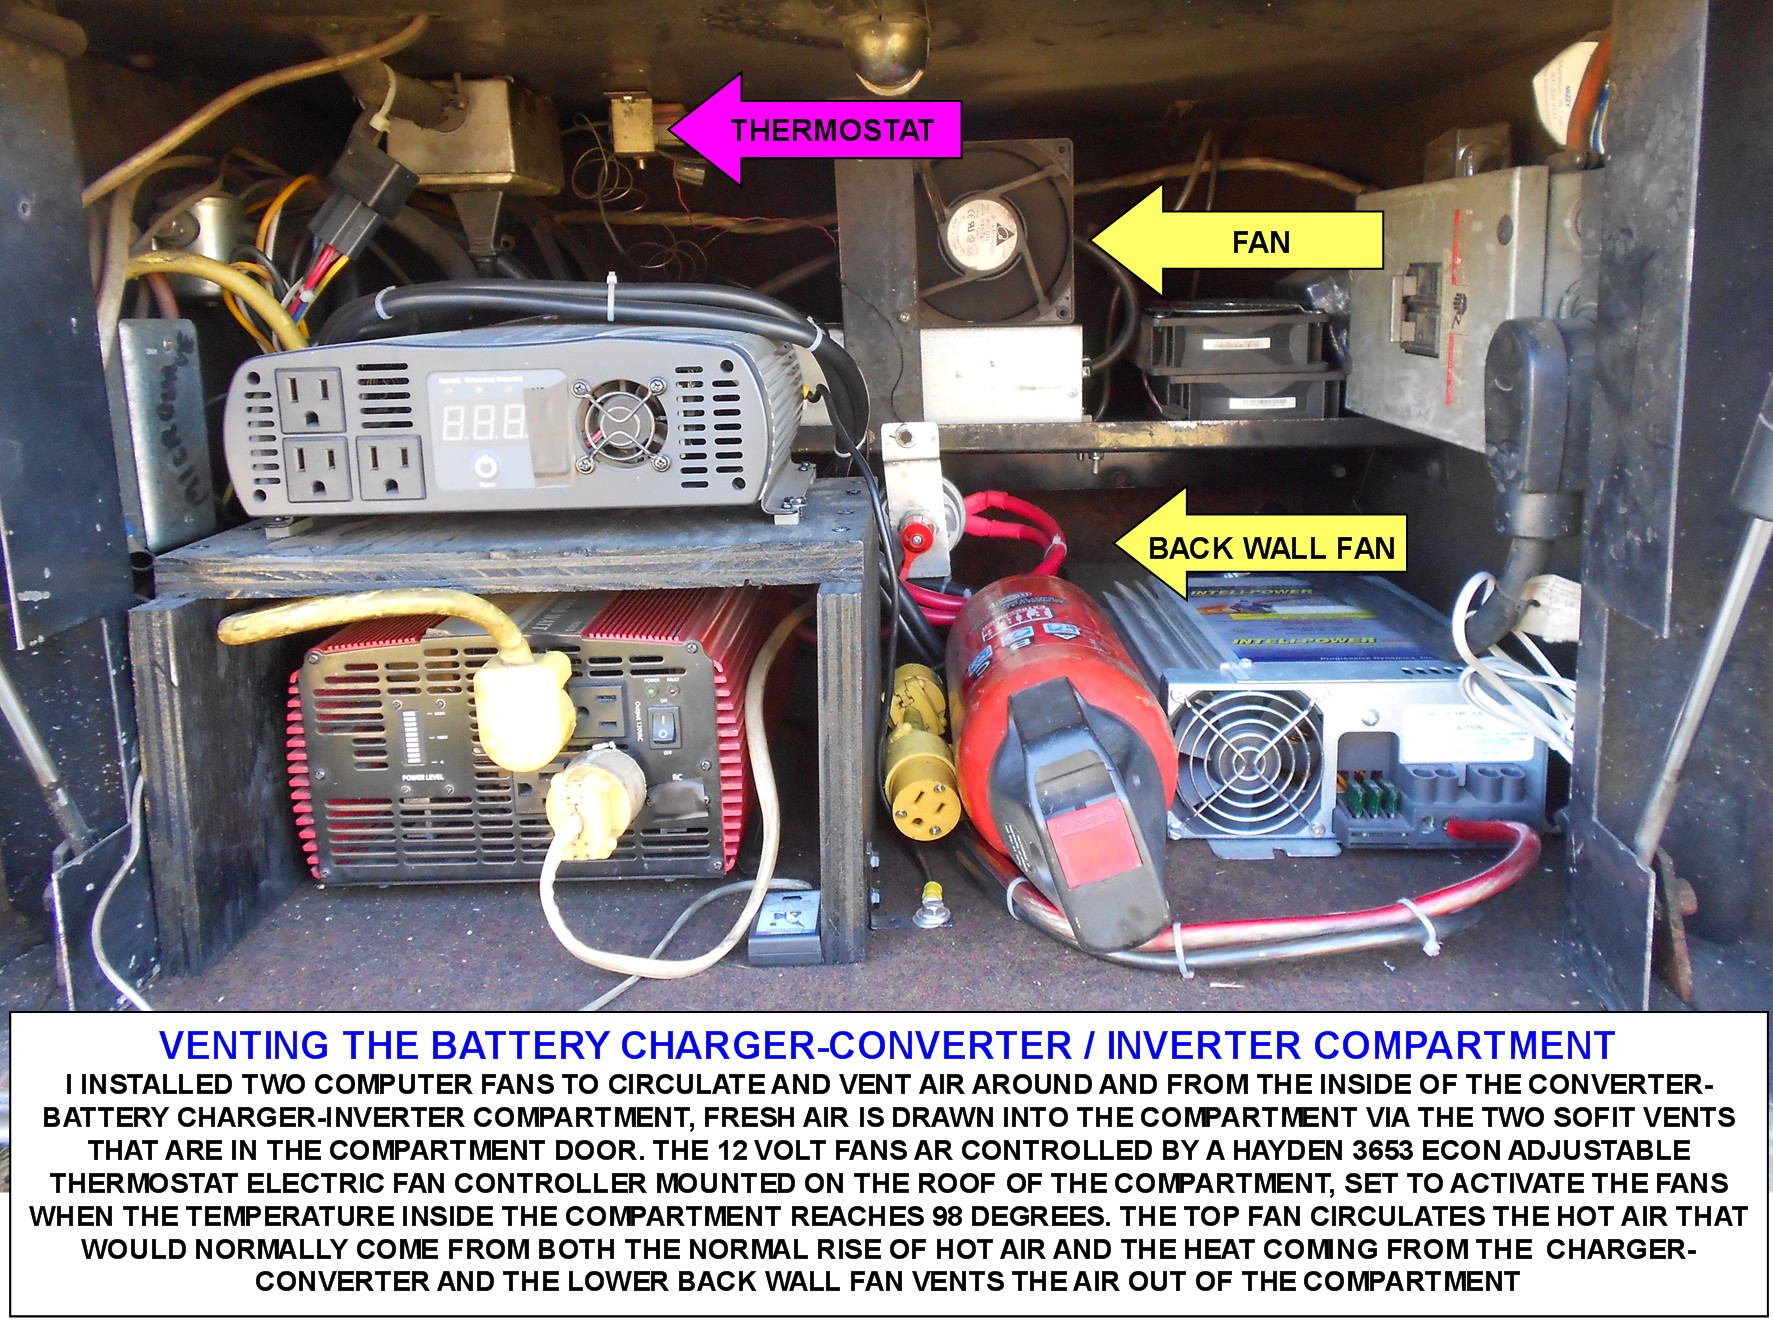 CHARGER INVERTER COMPARTMENT FANS